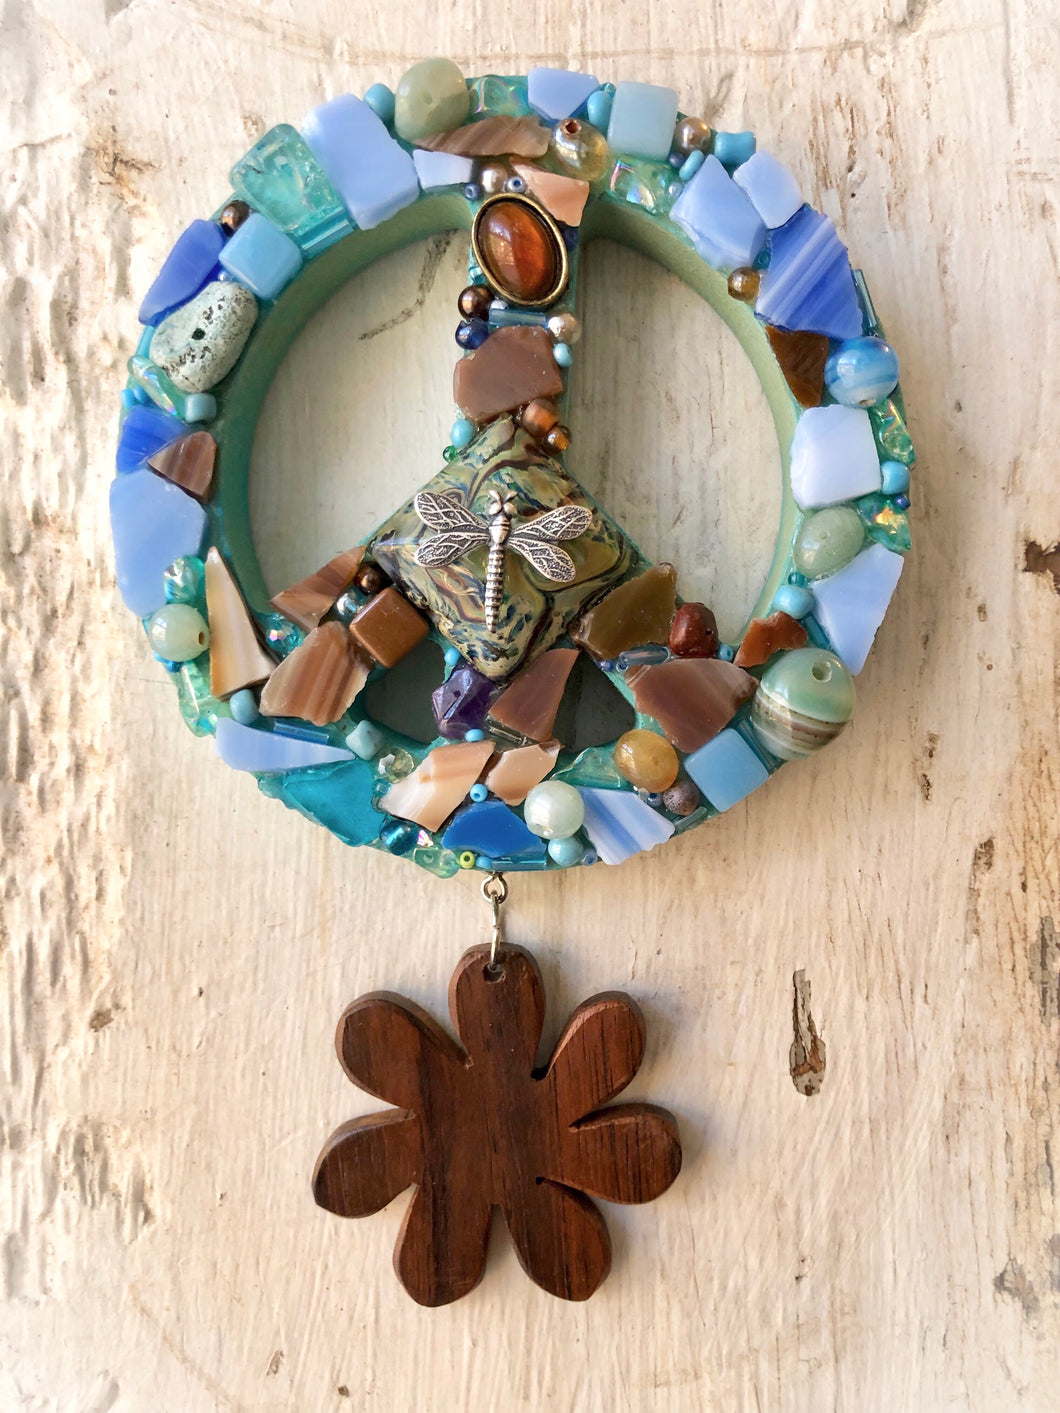 Mini peace mosaic with dragonfly